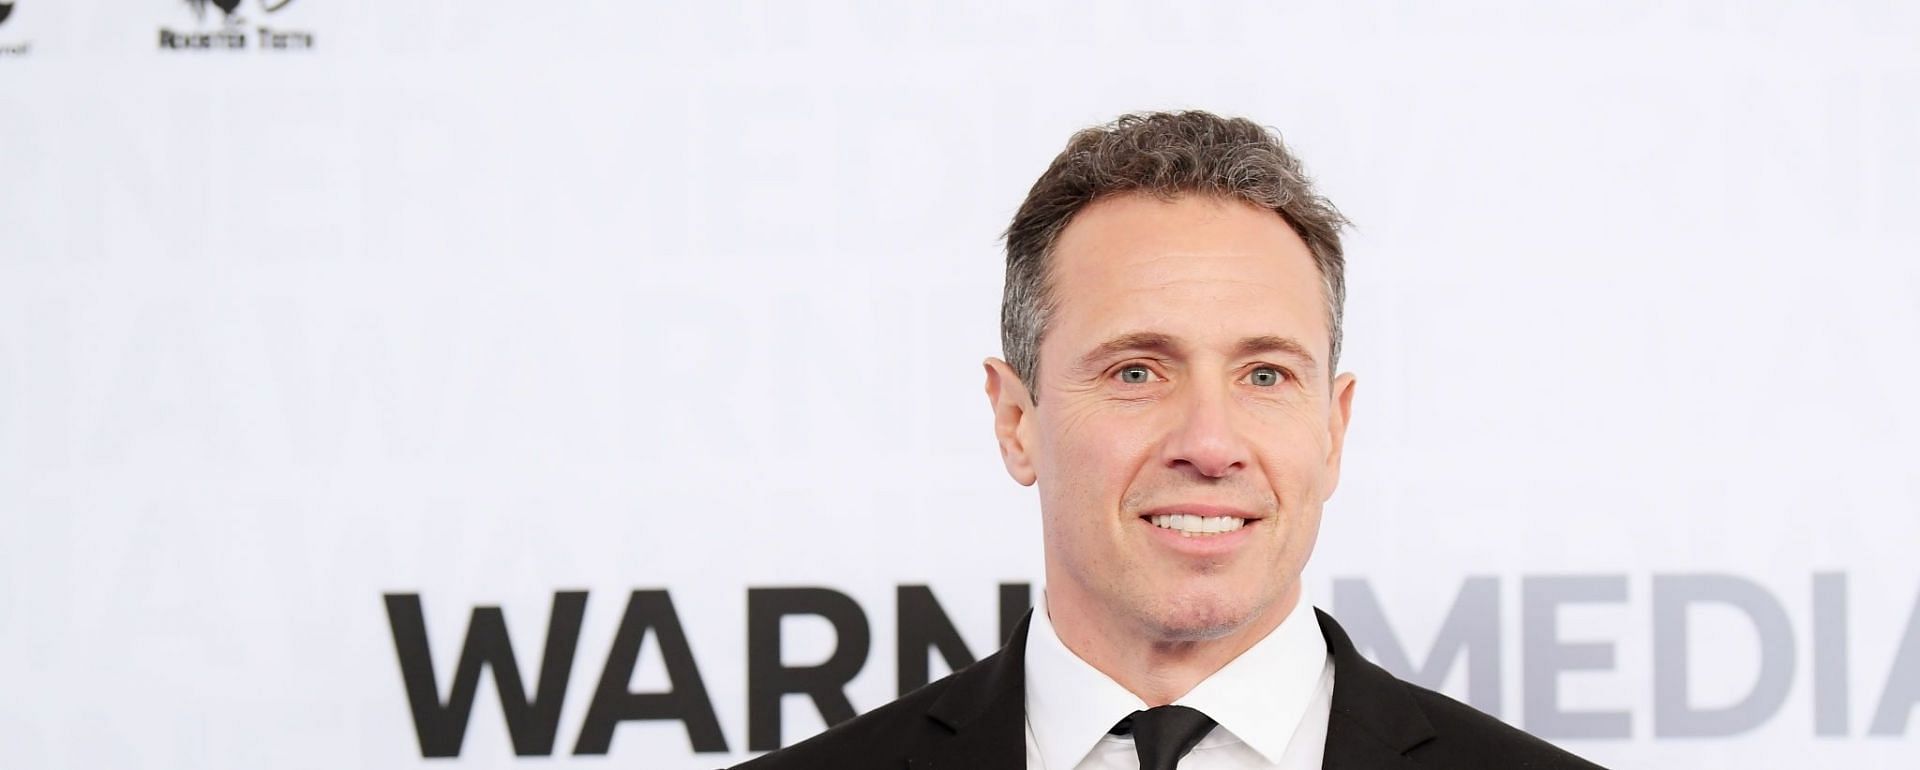 Longtime CNN anchor Chris Cuomo has been suspended by the network (Image via Getty Images/ Dimitrios Kambouris)